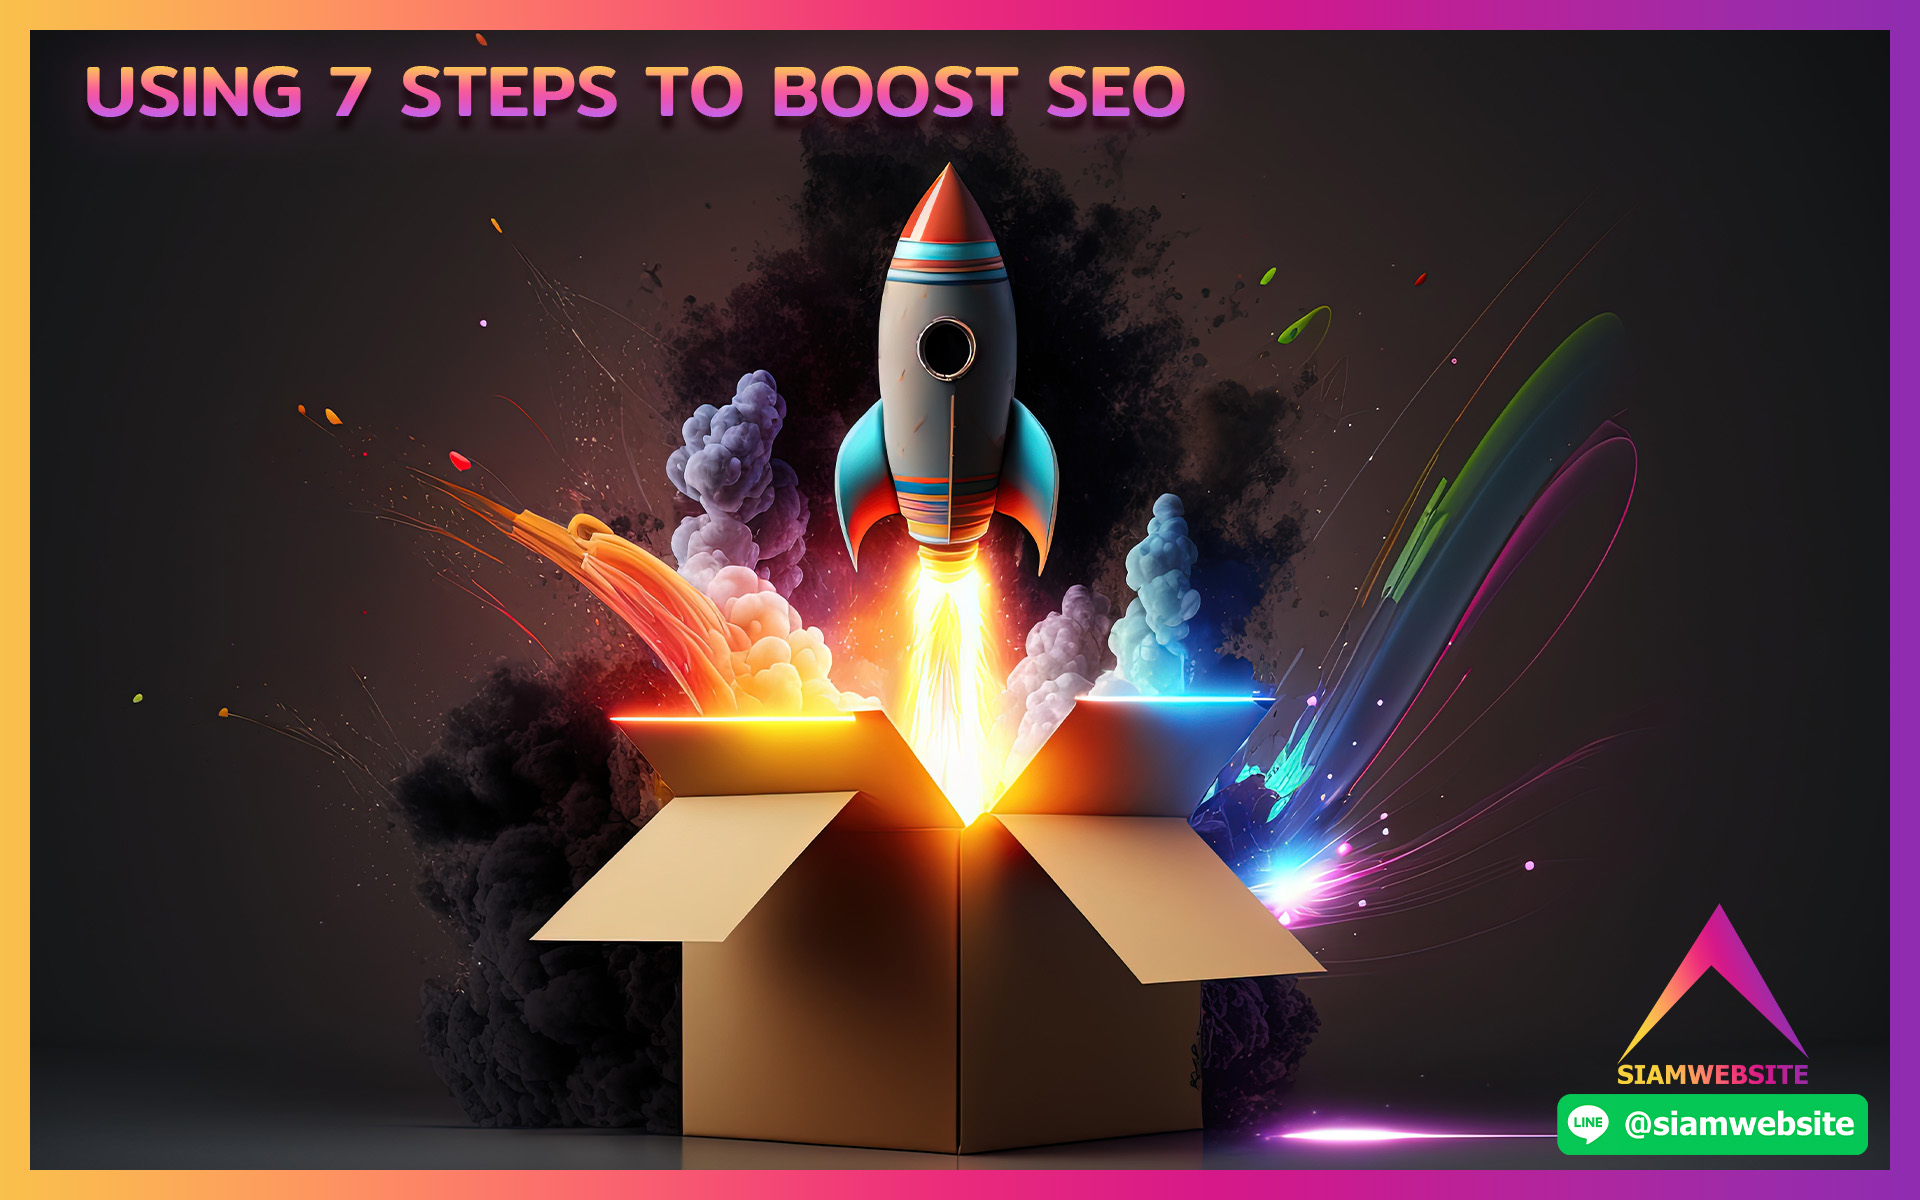 USING 7 STEPS TO BOOST SEO